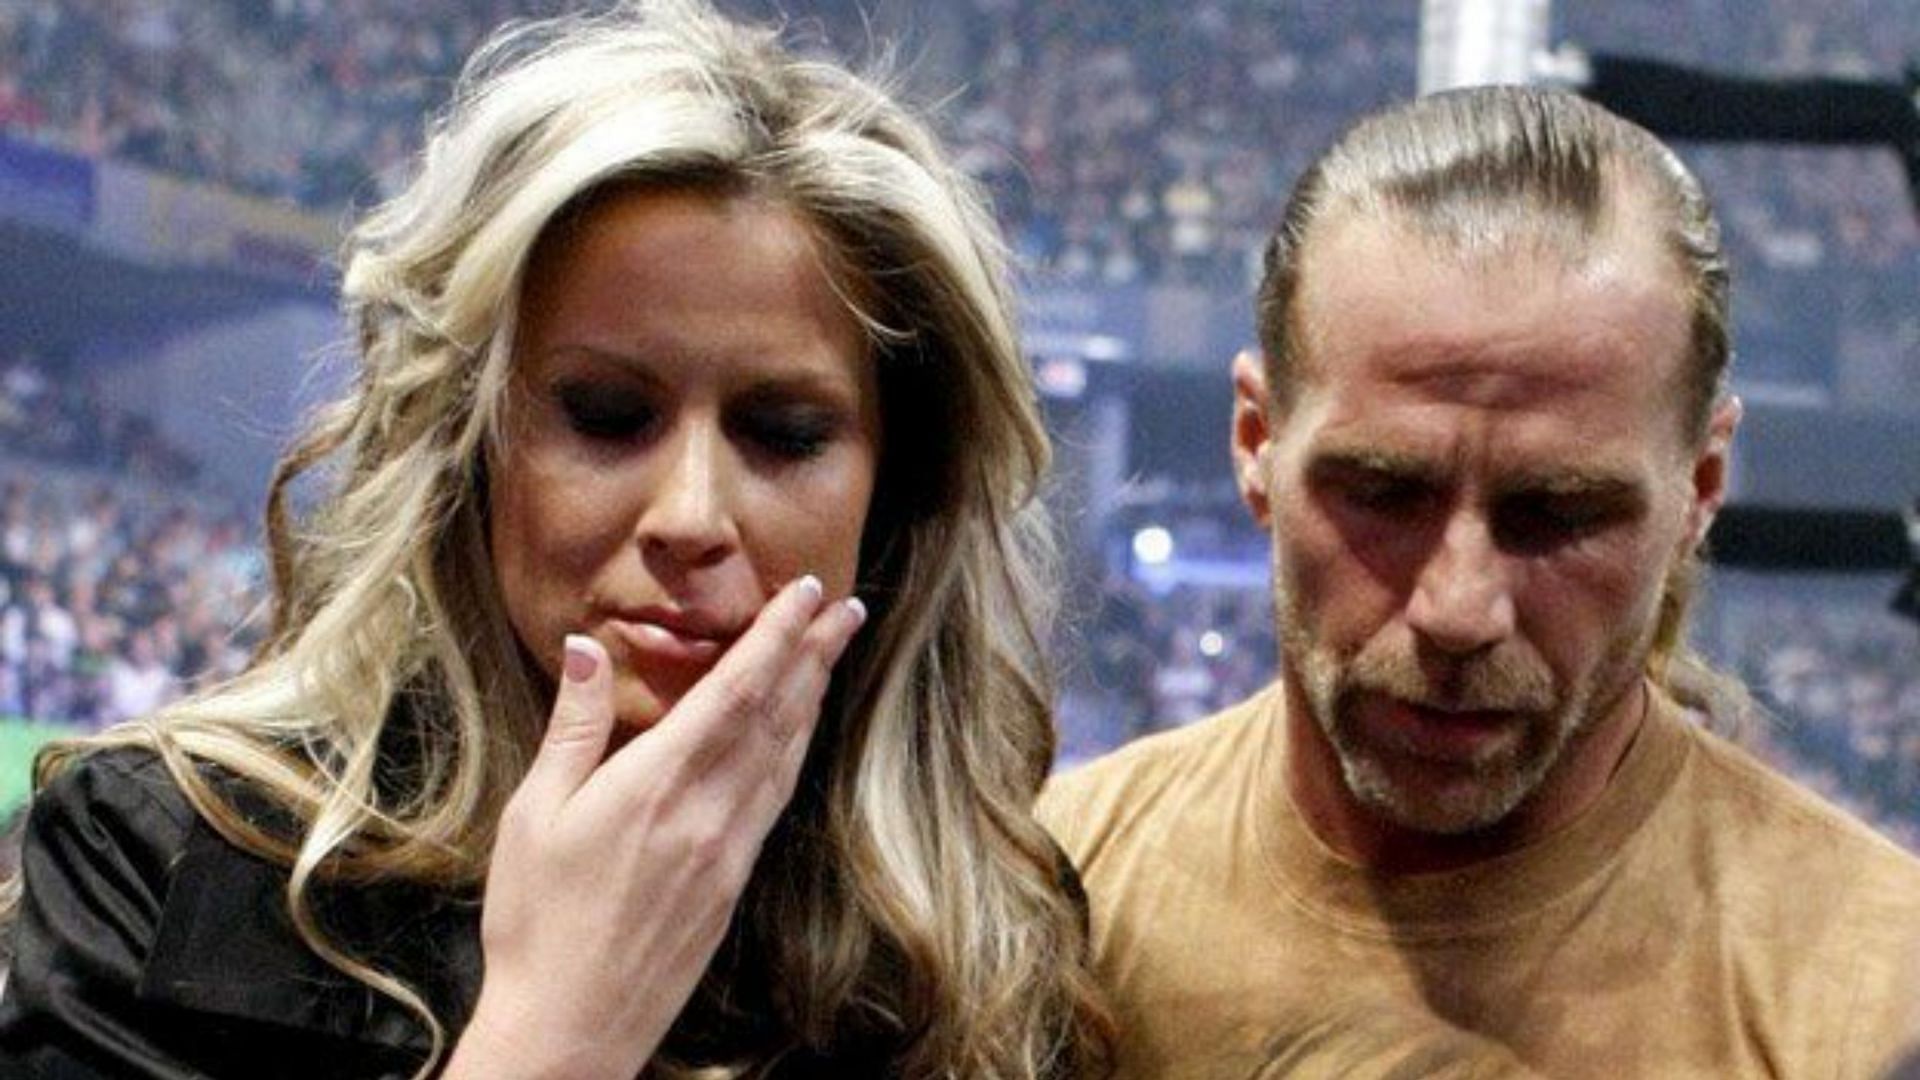 The WWE Hall of Famer&#039;s wife once asked for a divorce